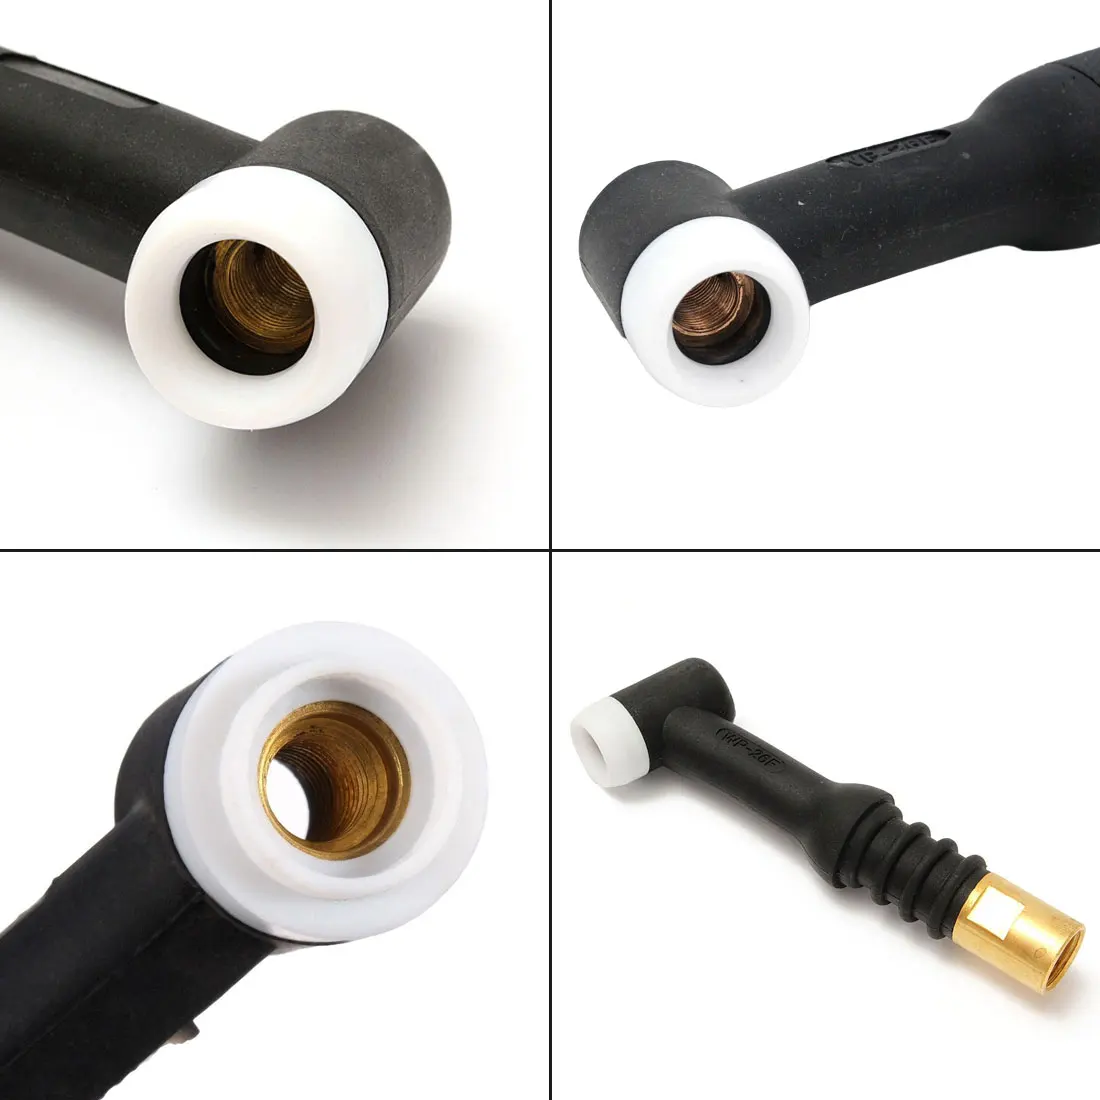 

250A DC 160A AC Tig Welding Torch Mayitr Black Soldering Torch Accessories Flexible Head Body Gas Cooled 26 Series Tool